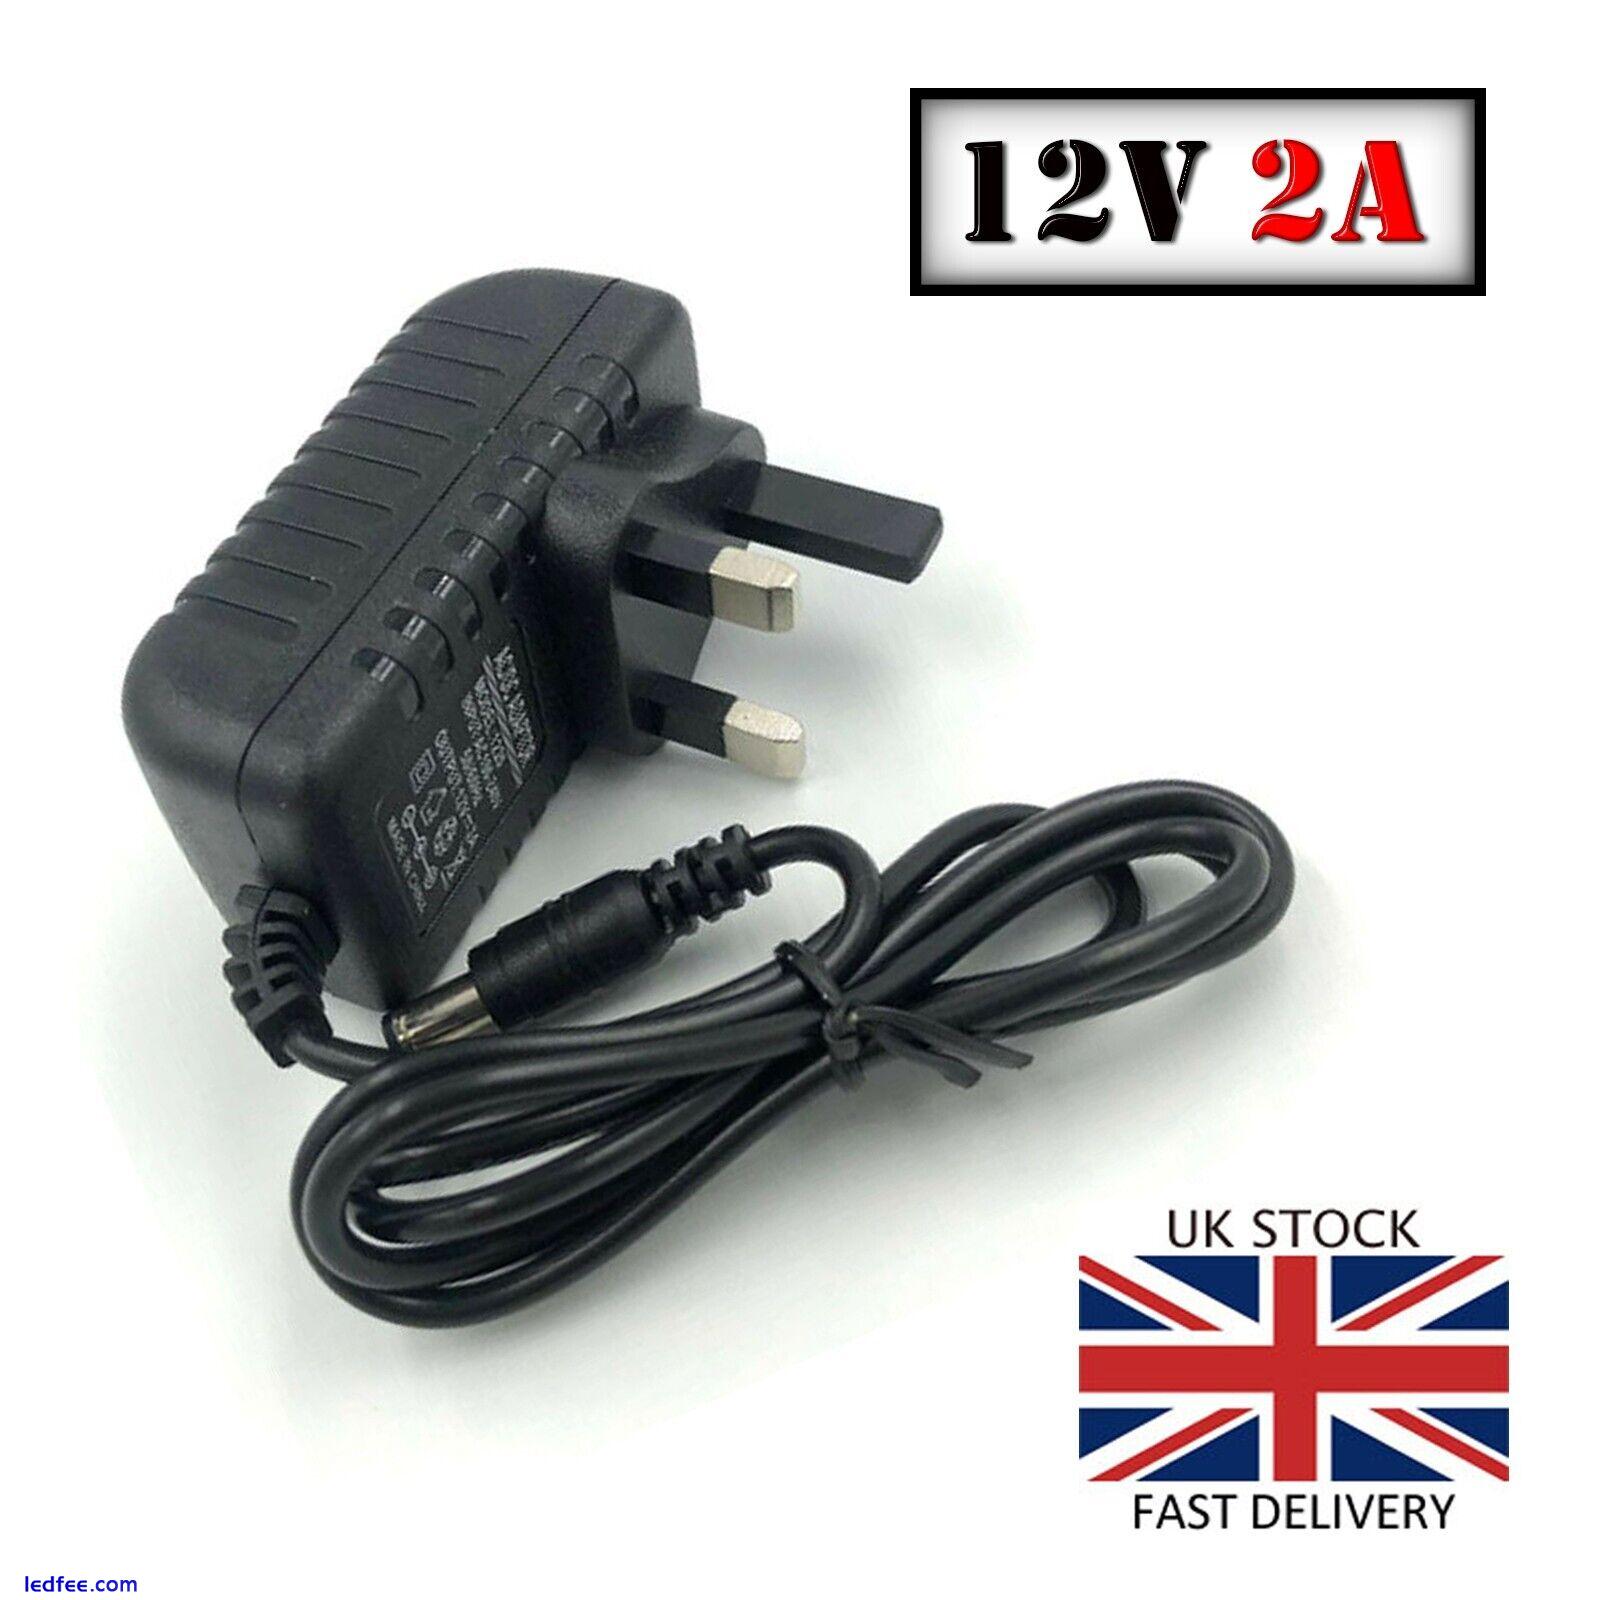 10 x 2A AC/DC UK Power Supply Adapter Safety Charger For LED Strip CCTV Camera 5 